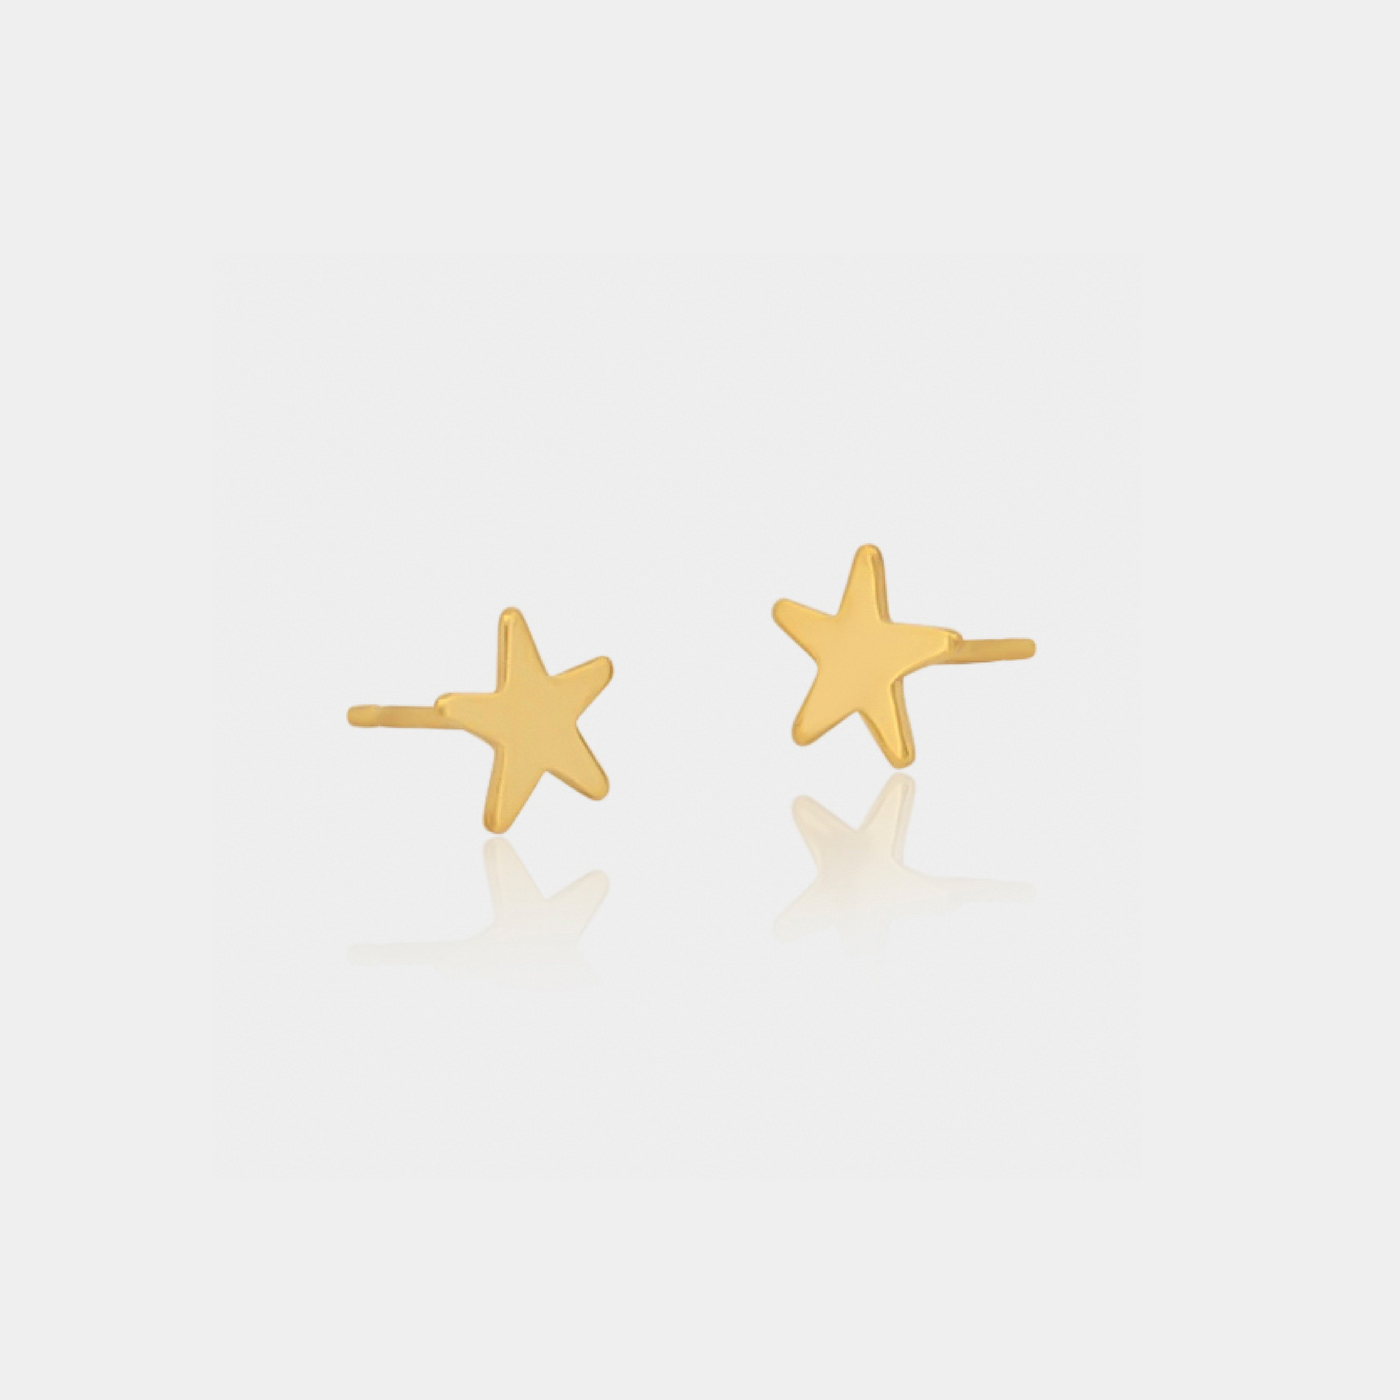 14K Gold Filled Earrings Star Studs LINK'D THE LABEL